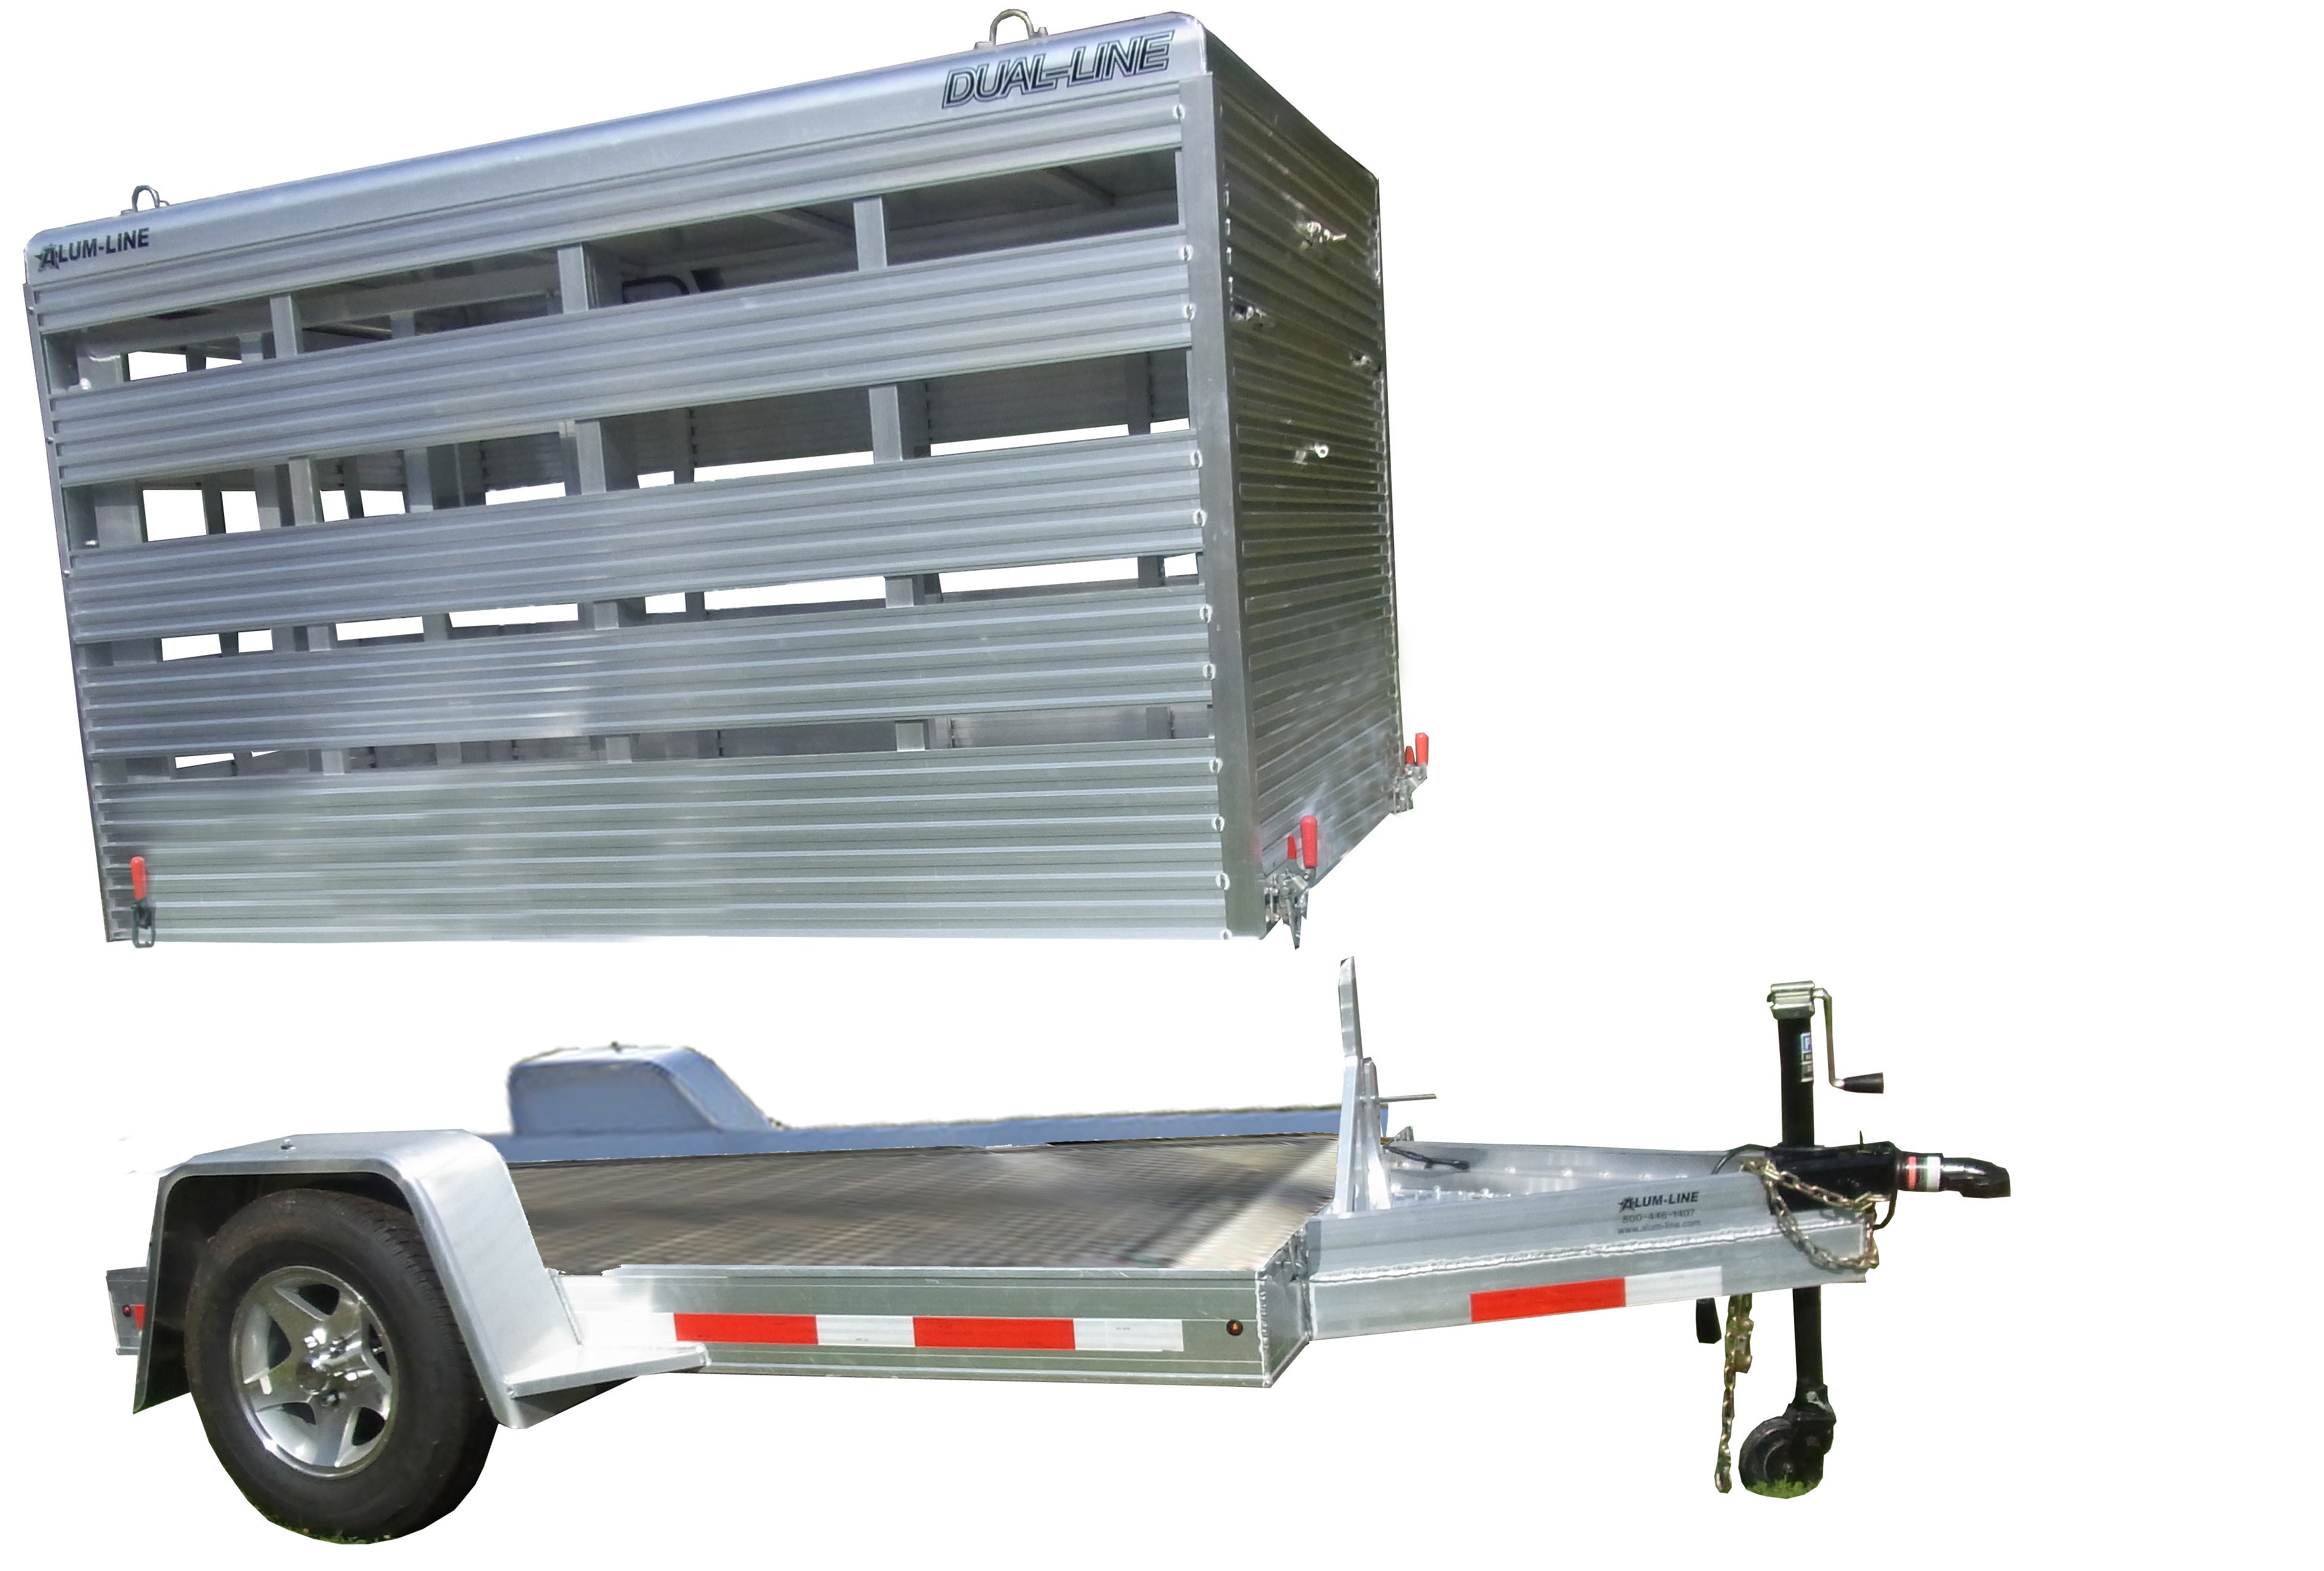 Buy & Sell New & Used Trailers All aluminum mini stock that can be used as a flatbed at TrailerShopper